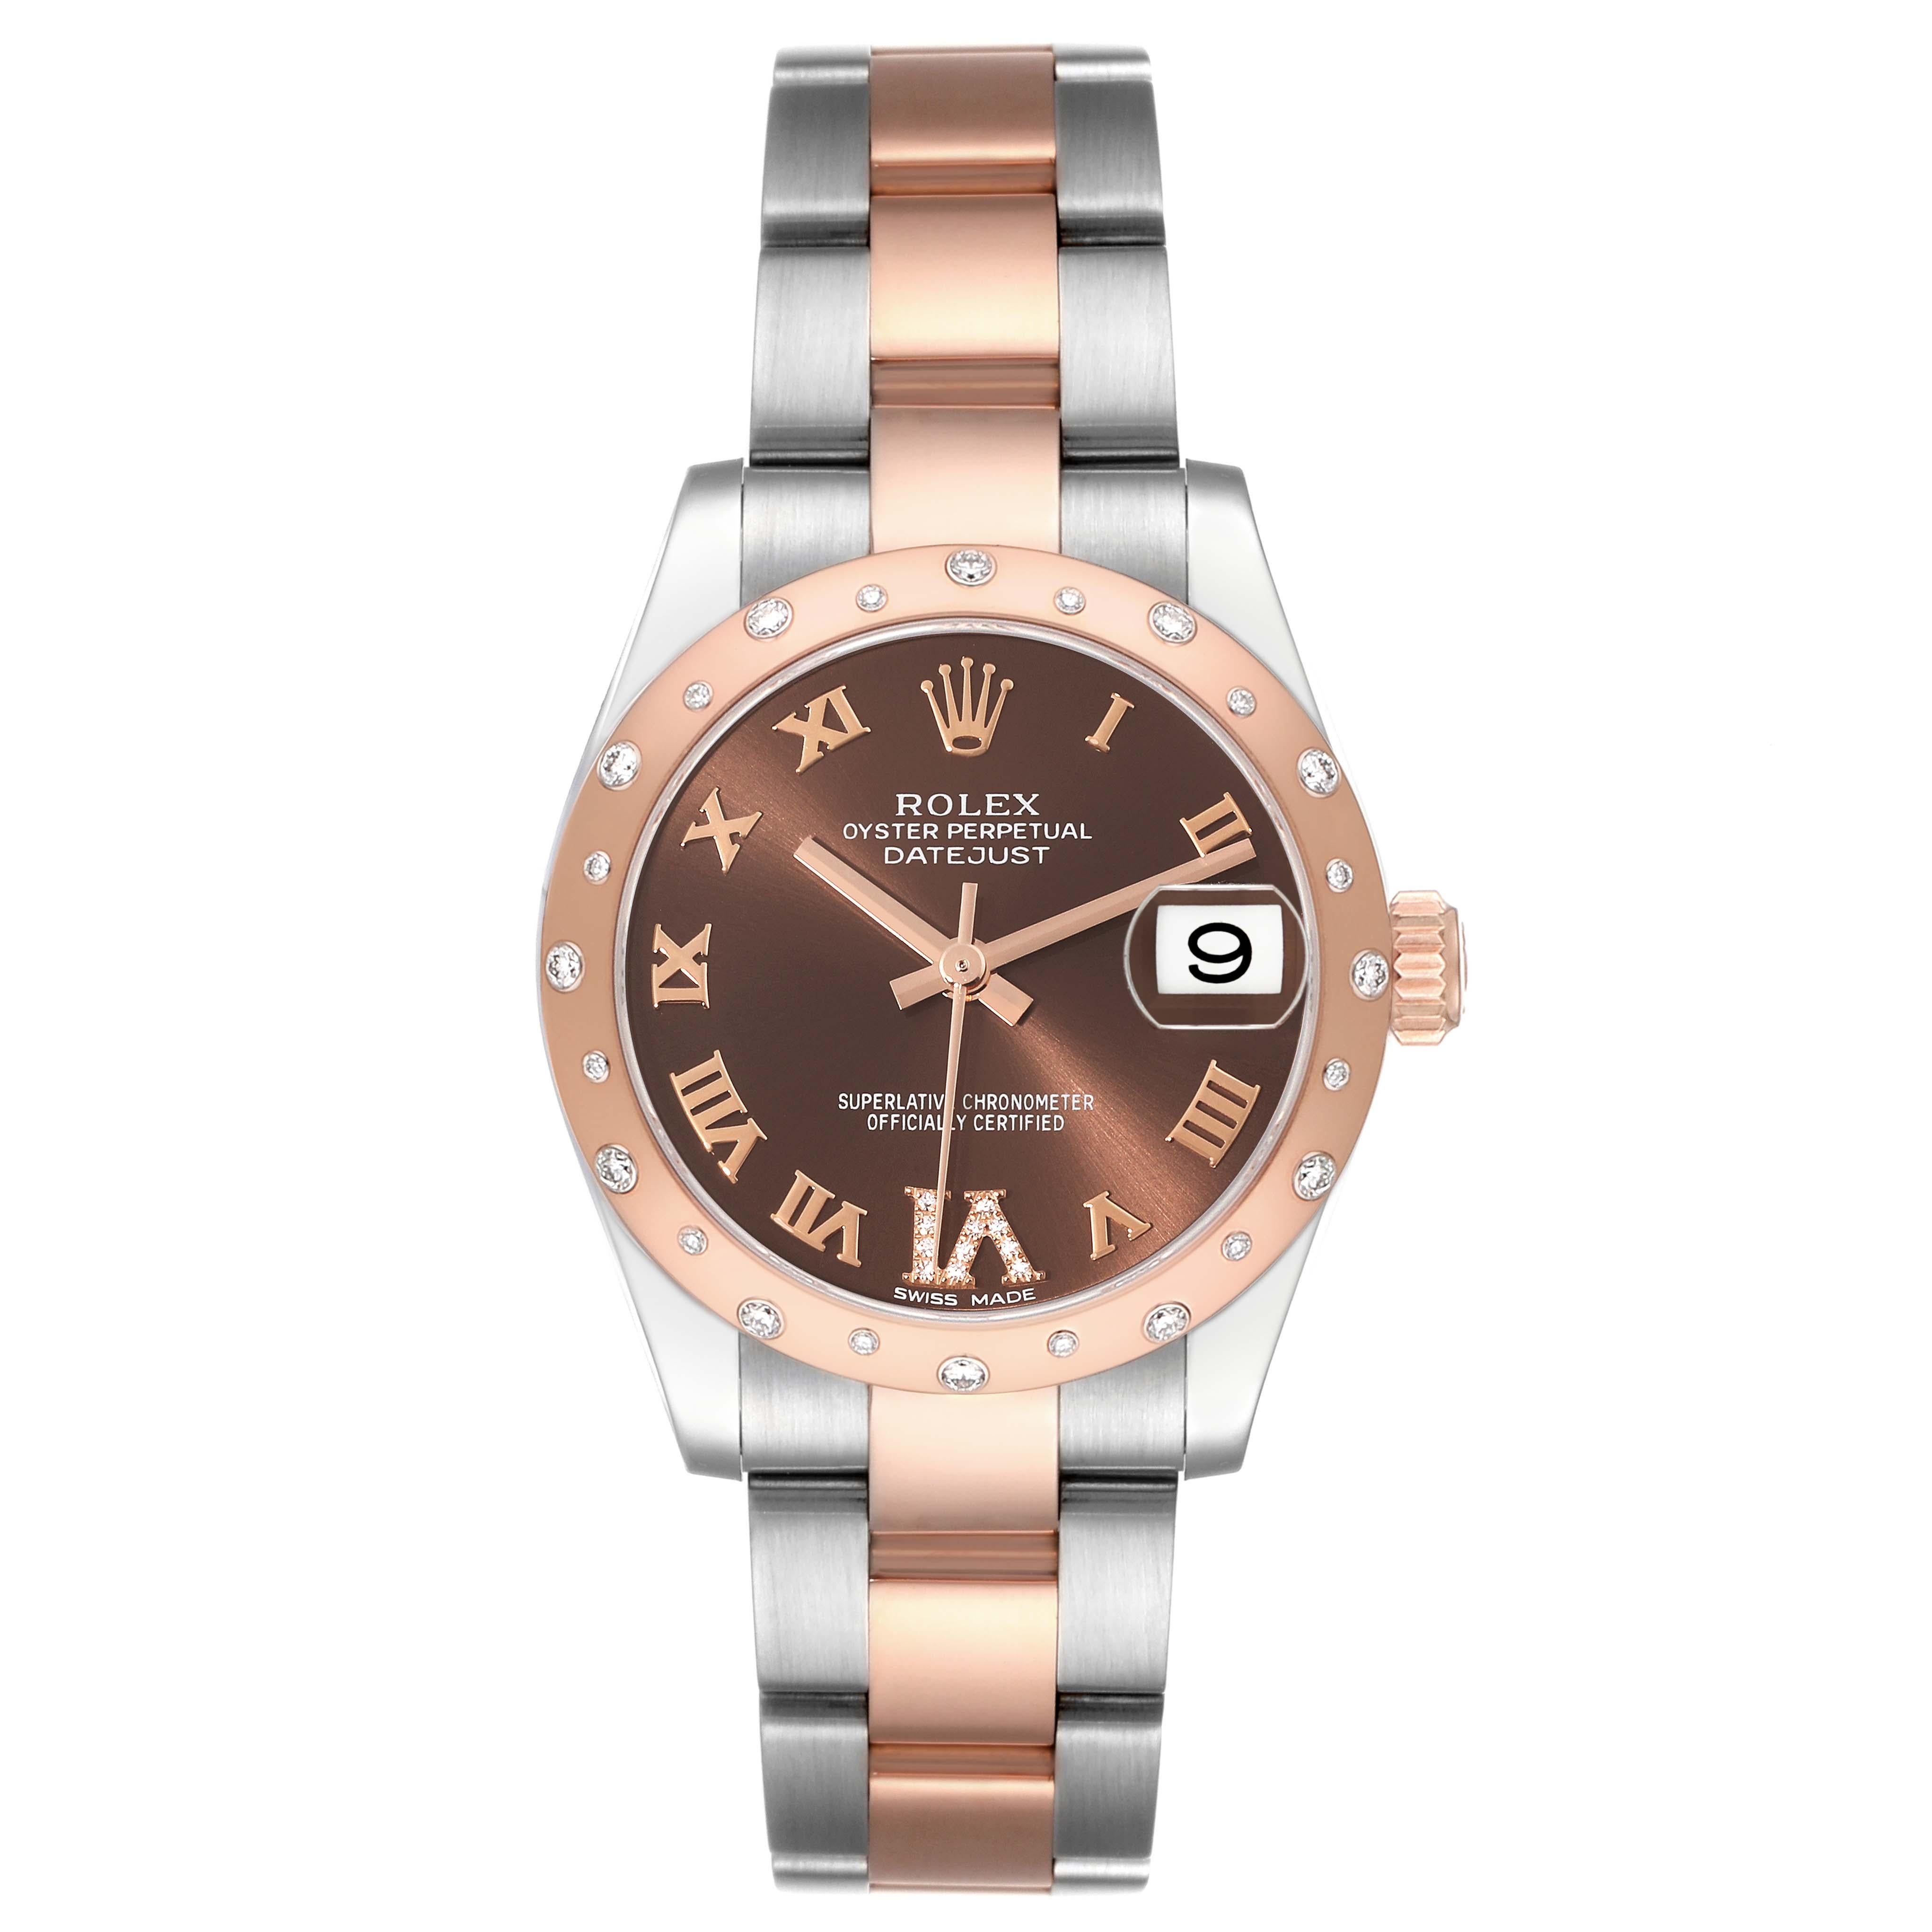 Rolex Datejust Midsize Steel Rose Gold Diamond Ladies Watch 178341. Officially certified chronometer automatic self-winding movement with quickset date function. Stainless steel and 18K rose gold oyster case 31 mm in diameter. Rolex logo on a crown.